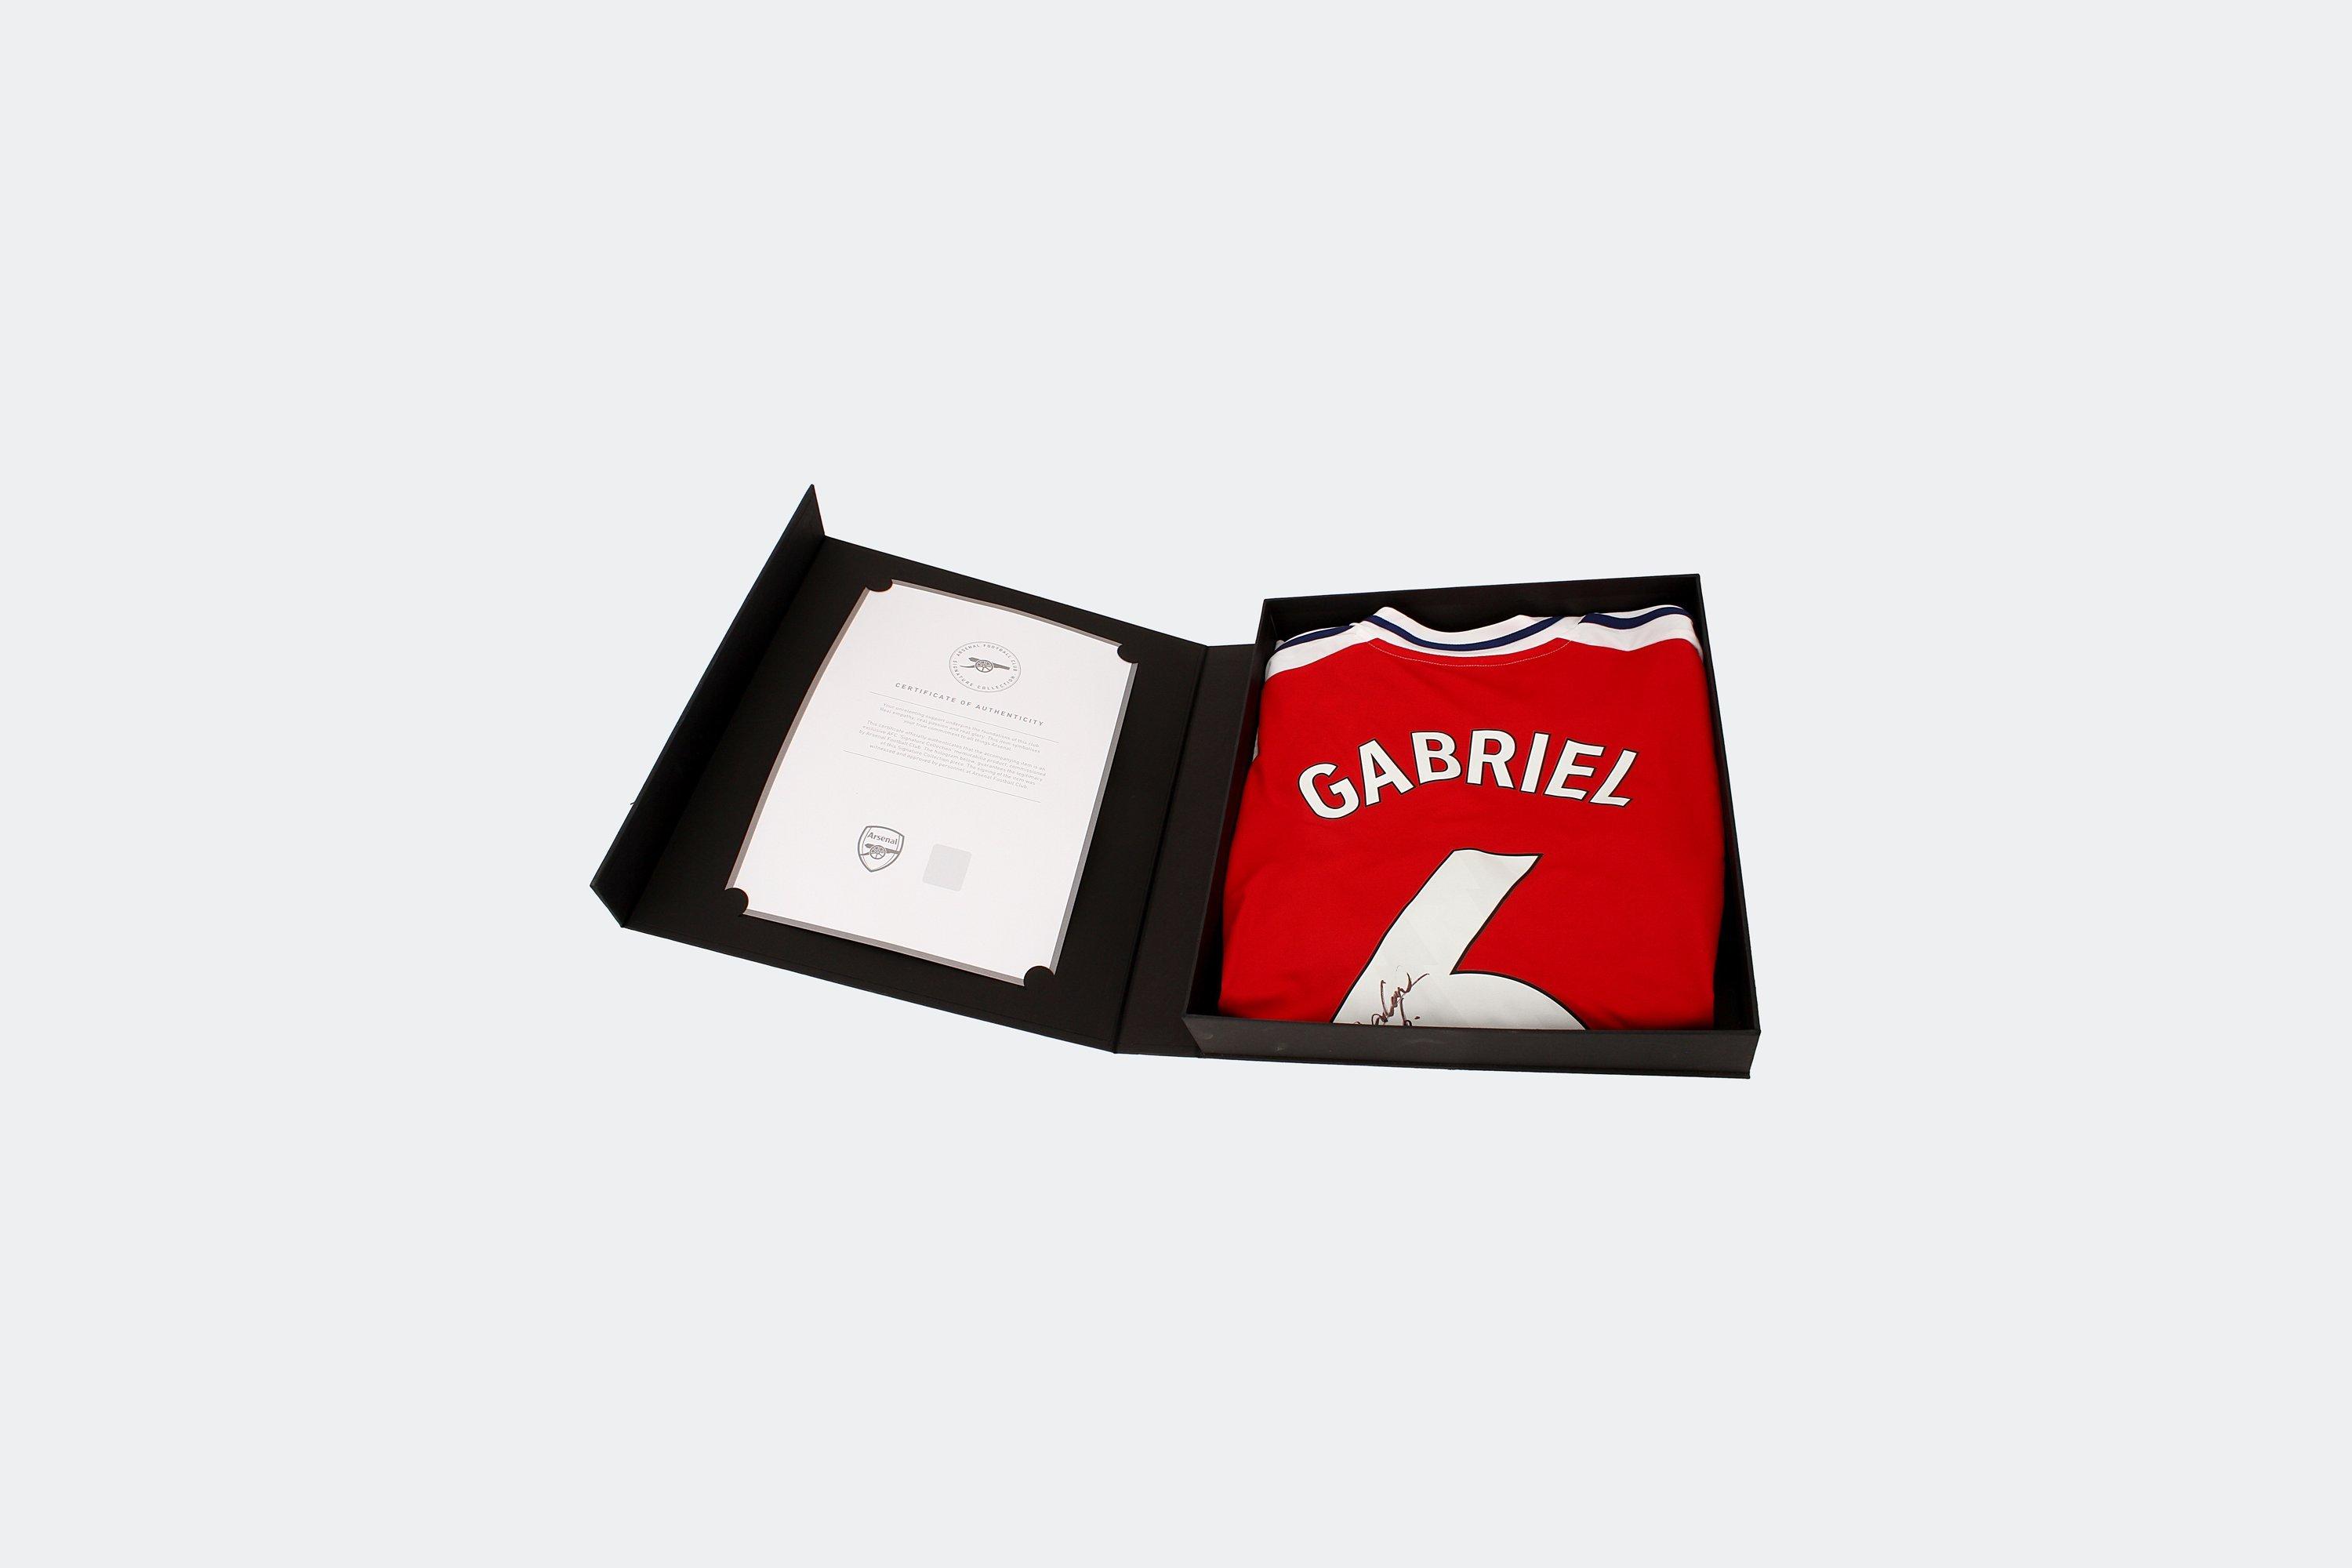 Arsenal 24/25 Home Boxed Signed Shirt GABRIEL